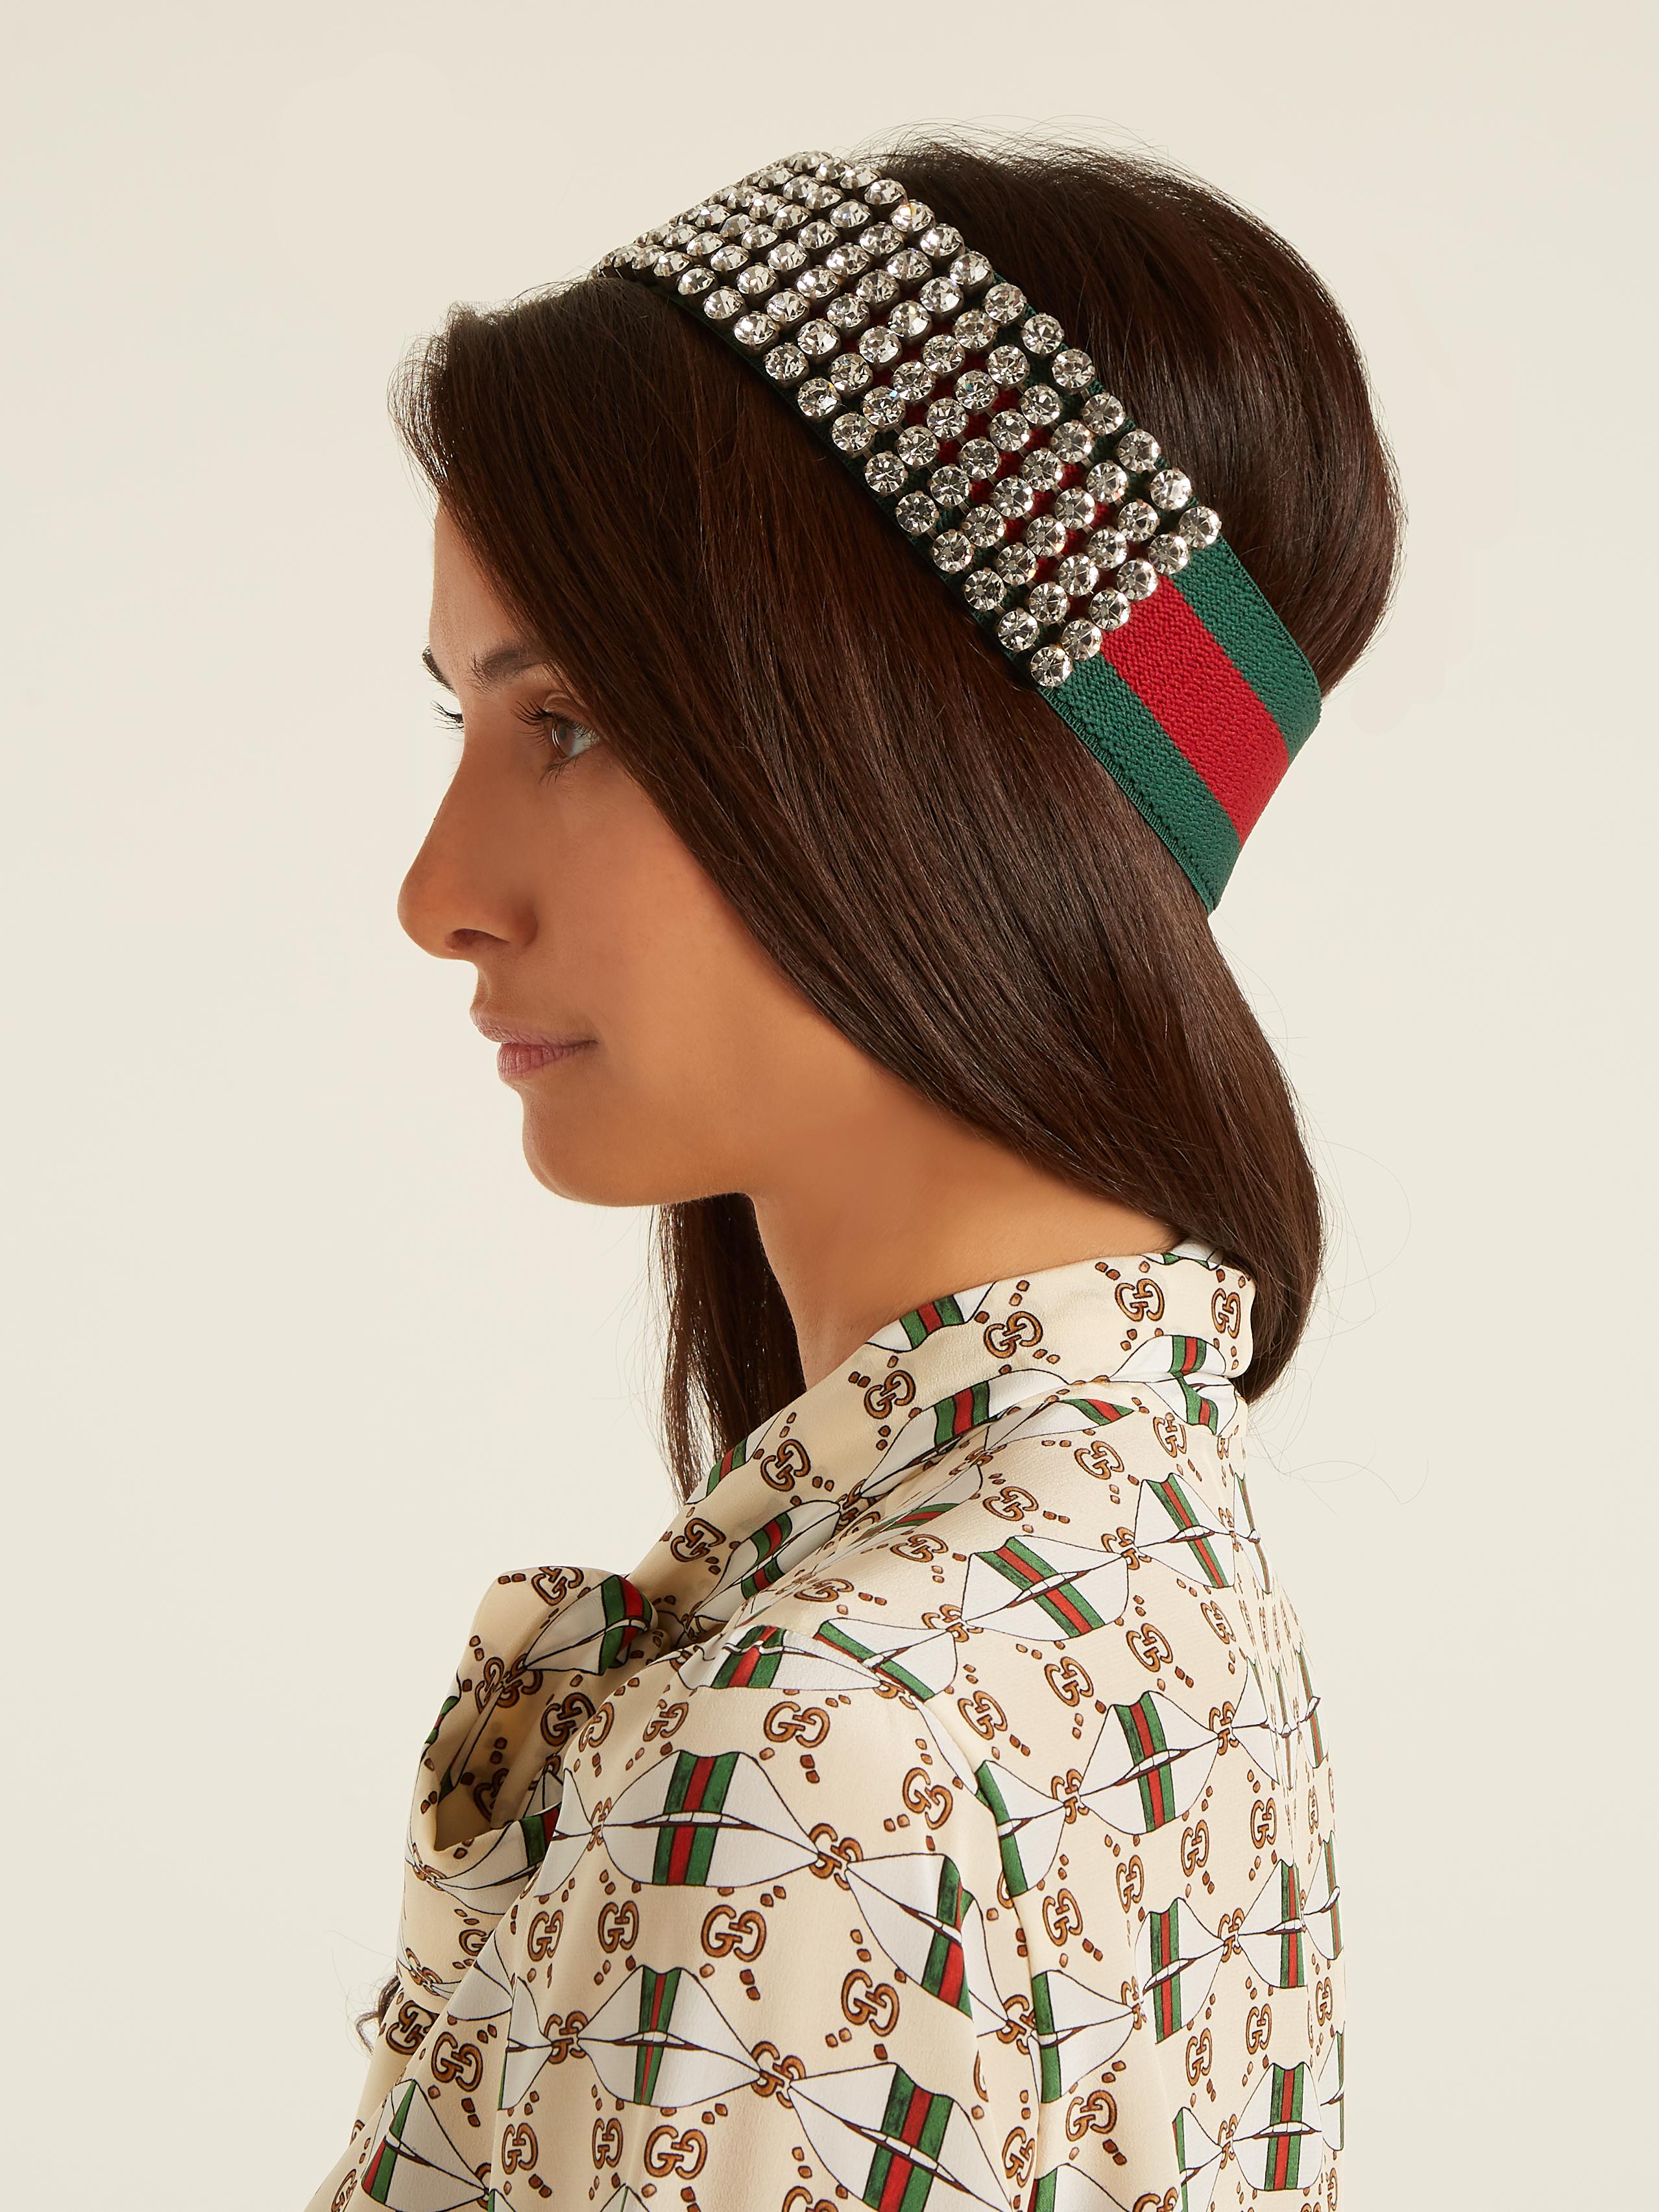 how much is a gucci headband